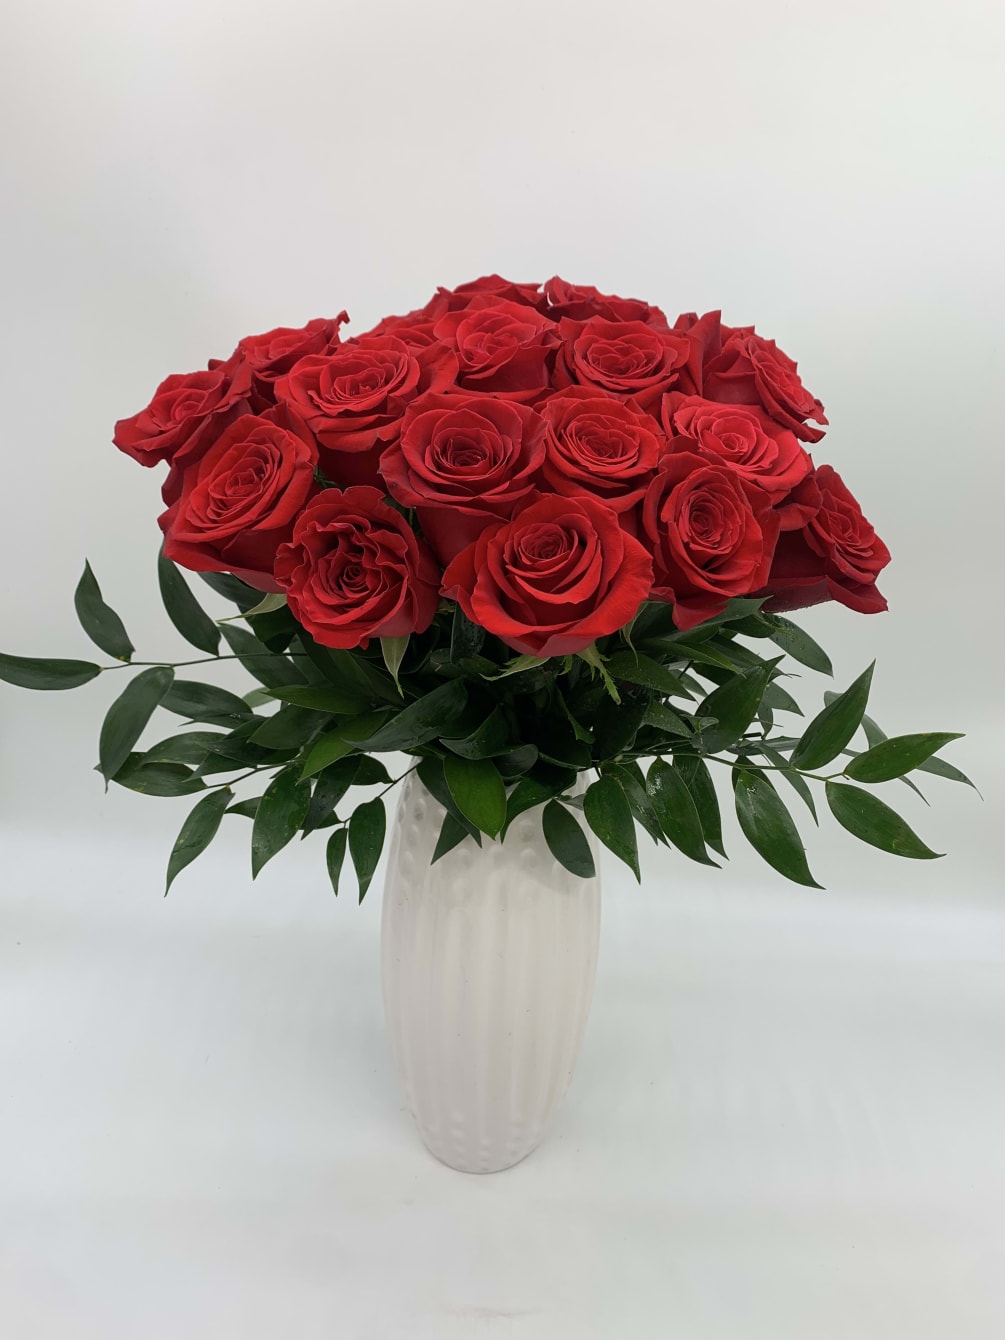 This Arrangement contains 24 Red Roses with a ceramic base with 16